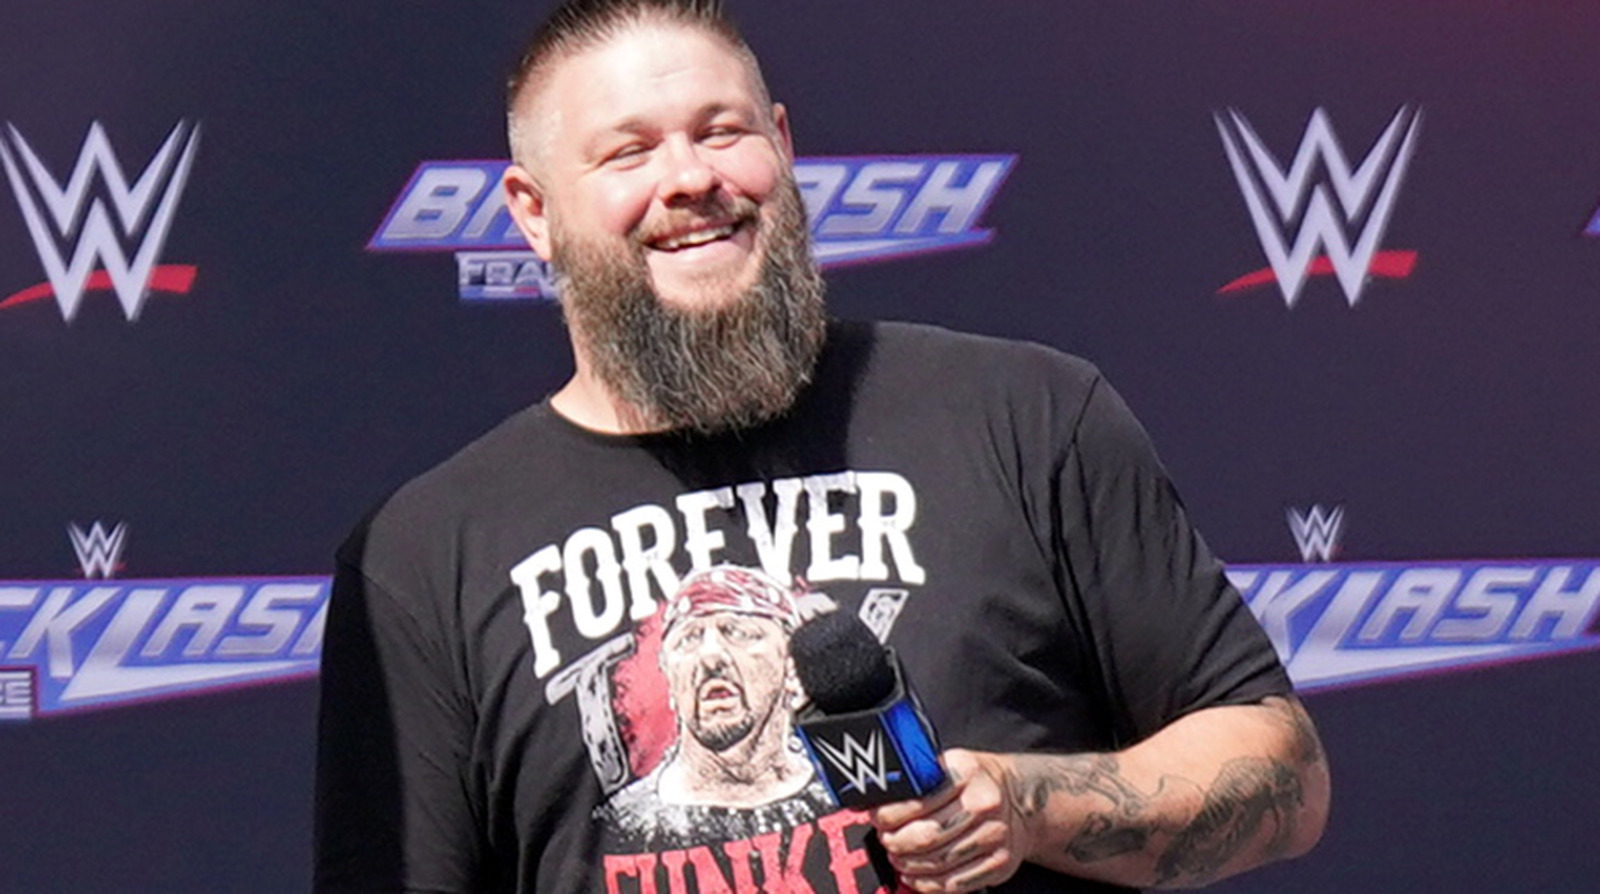 Kevin Owens Provides Major Update On WWE Contract Status, Whether He Intends To Renew